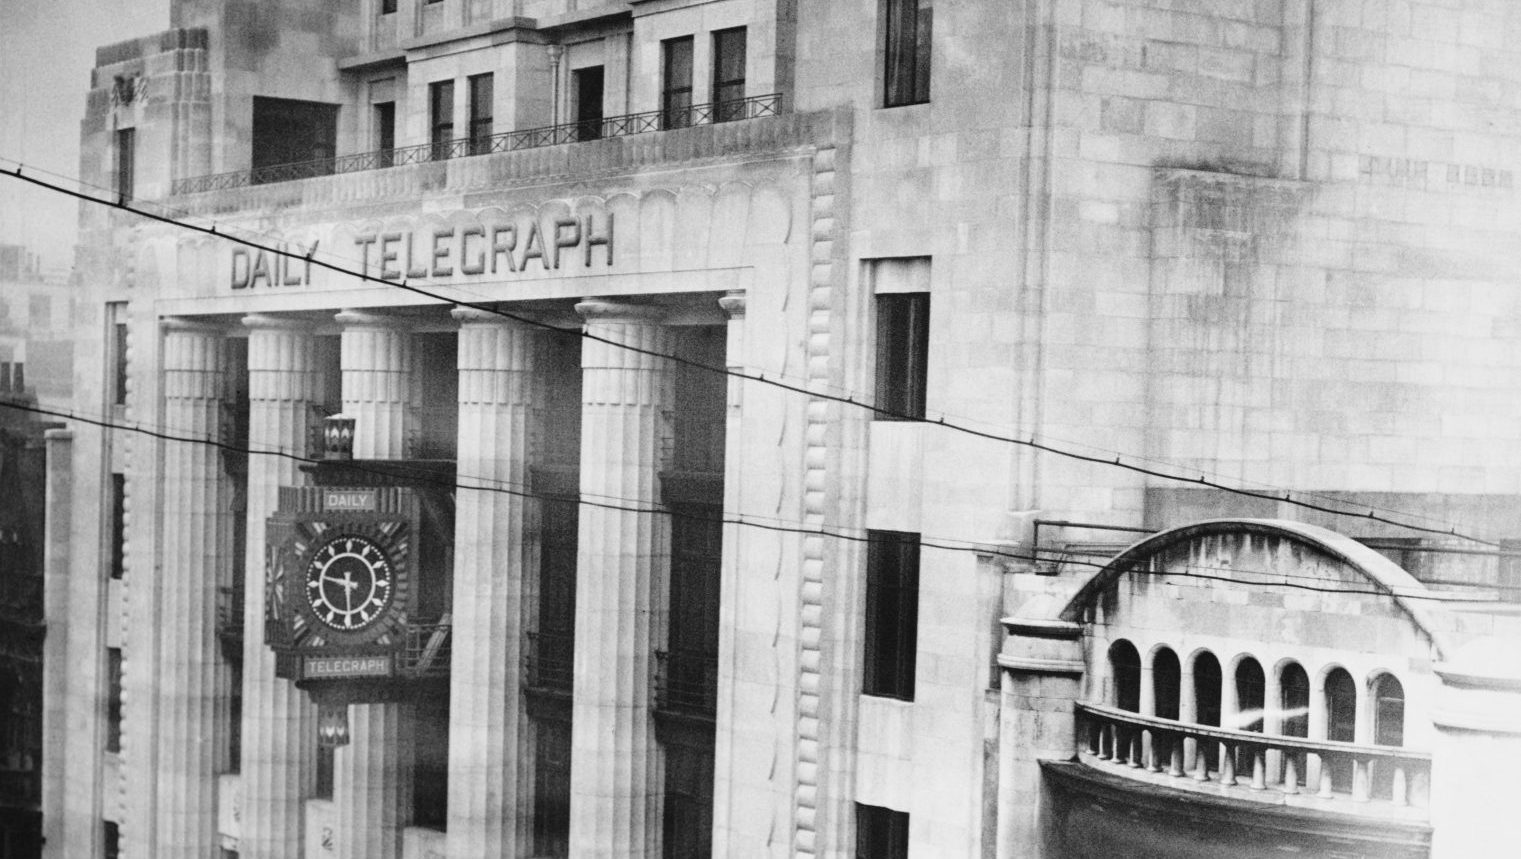 Exterior view of the Daily Telegraph Building, an 8-storey building of Portland stone, showing the clock mounted on the facade, on Fleet Street, in the City of London, England, 1931. Photo: Fox Photos/Hulton Archive/Getty Images